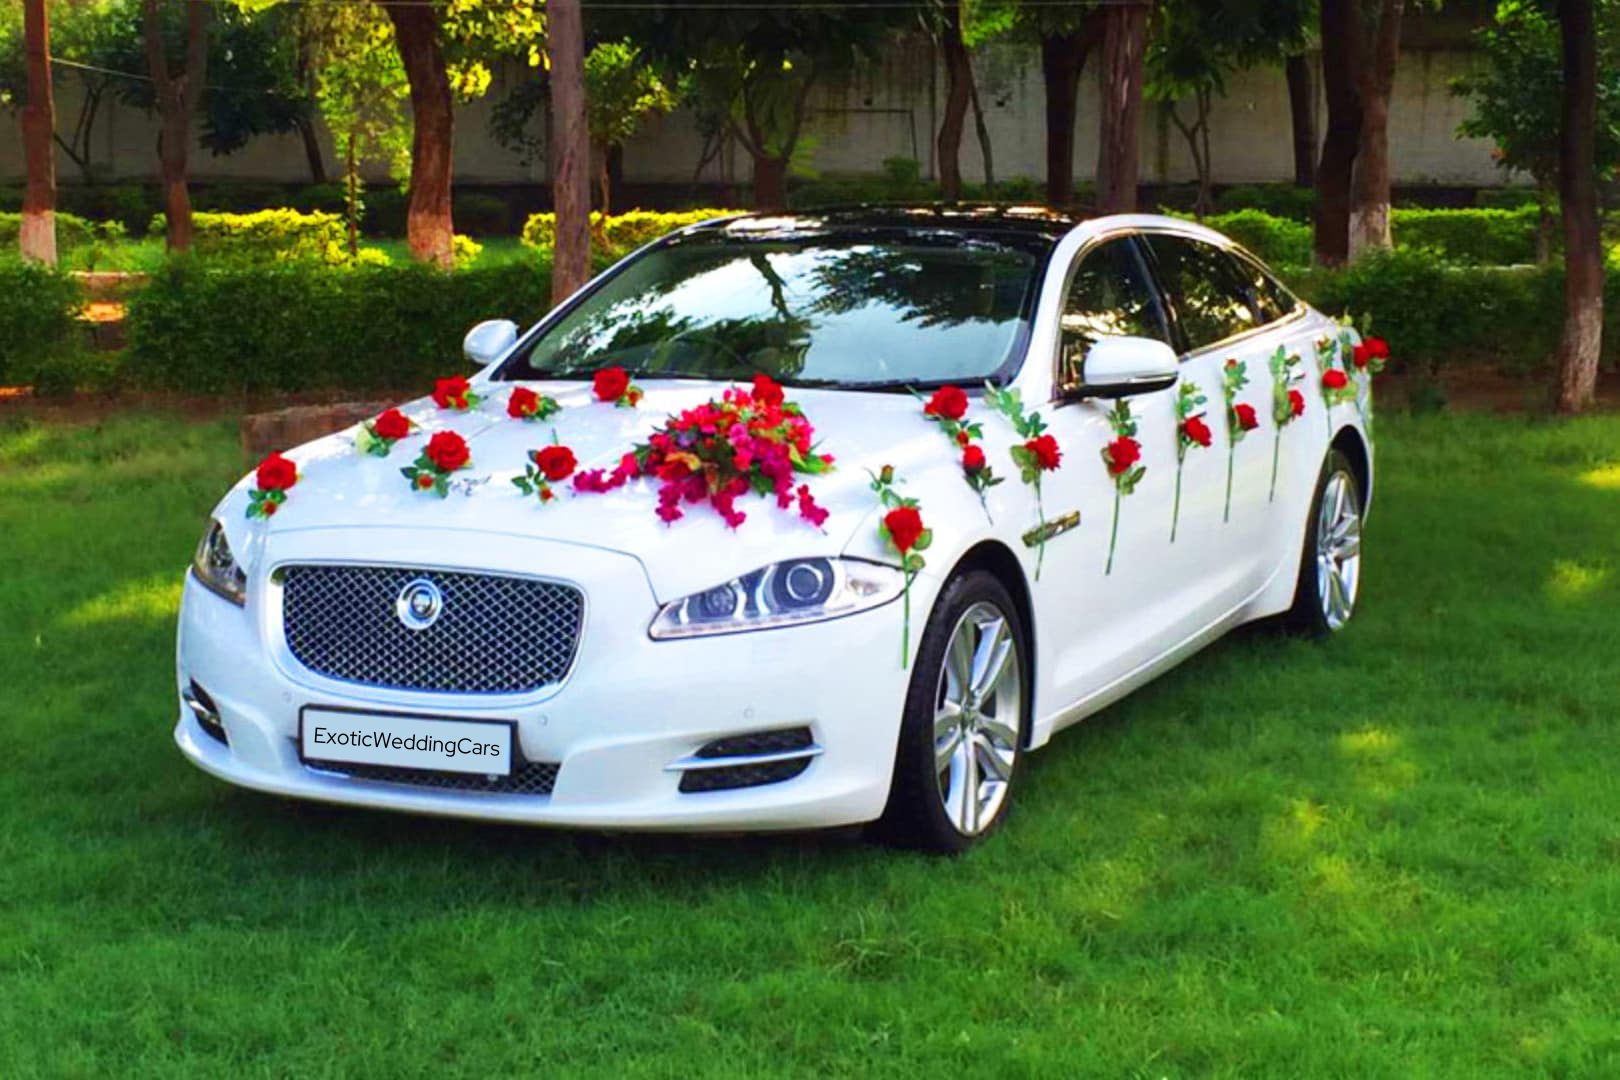 Why Choose Exotic Wedding Cars on Rent